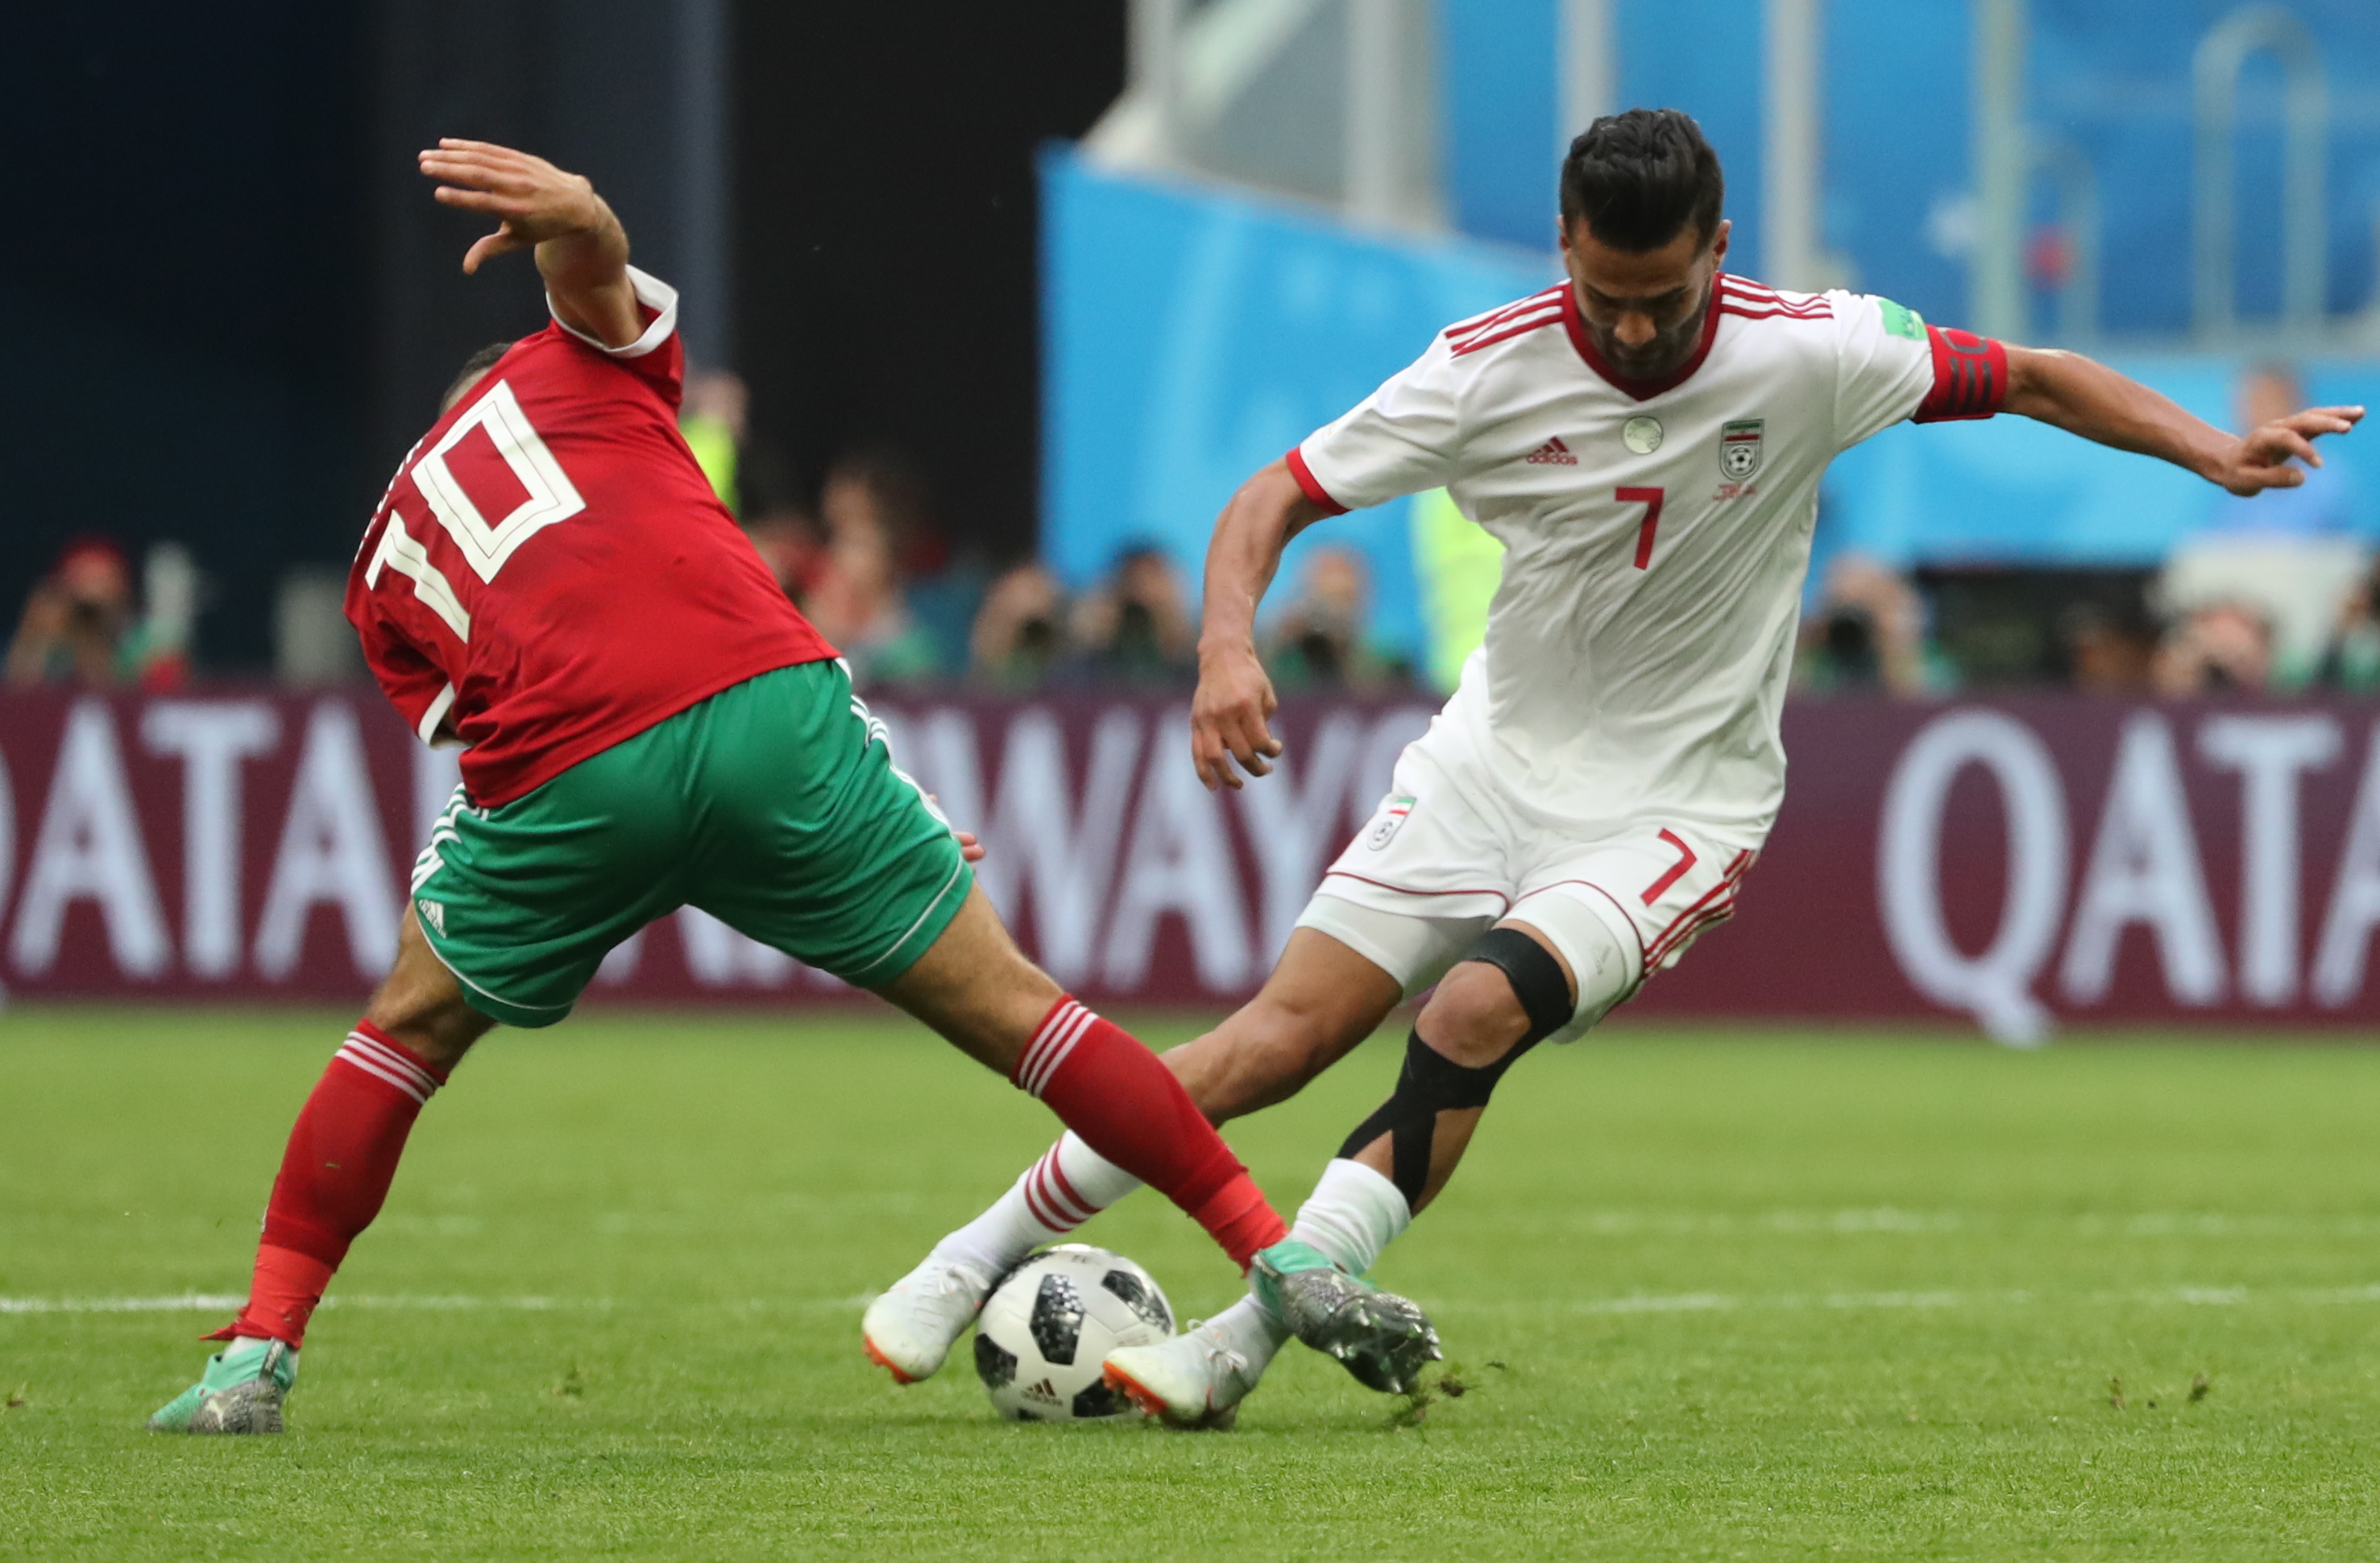 ST PETERSBURG, RUSSIA - JUNE 15, 2018: Morocco's Younes Belhanda (L) and Iran's Masoud Shojaei in a First Stage Group B football match between Morocco and Iran at Saint-Petersburg Stadium (also known as Krestovsky Stadium) at FIFA World Cup Russia 2018 (Alexander Demianchuk&mdash;Alexander Demianchuk/TASS)